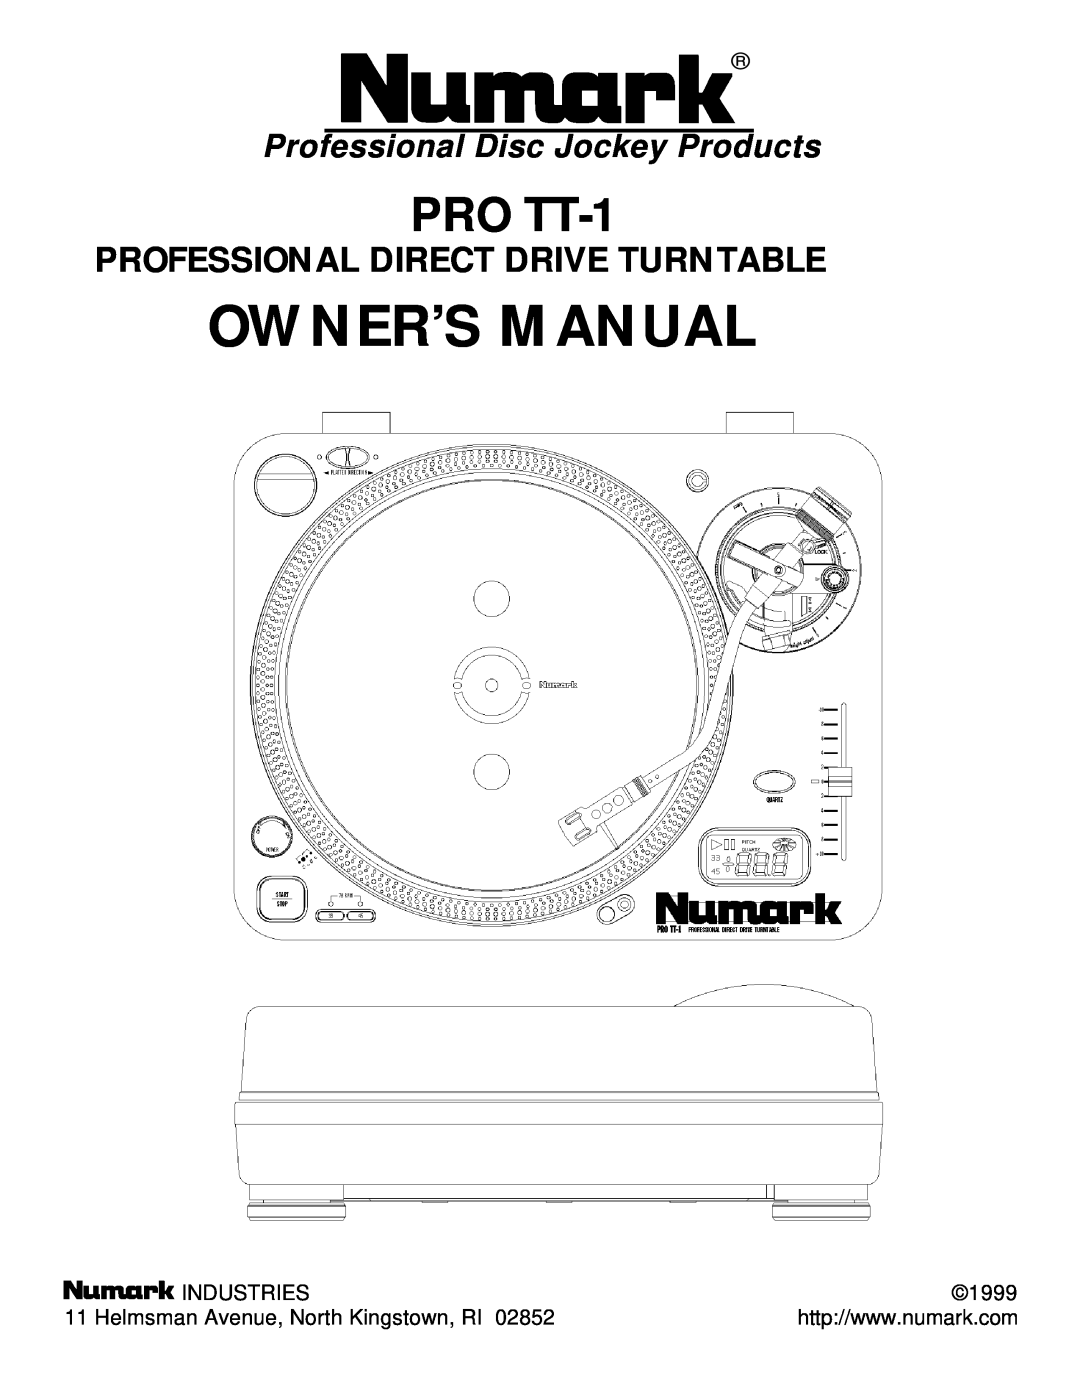 Numark Industries PRO TT-1 owner manual Professional Disc Jockey Products, Professional Direct Drive Turntable, Industries 